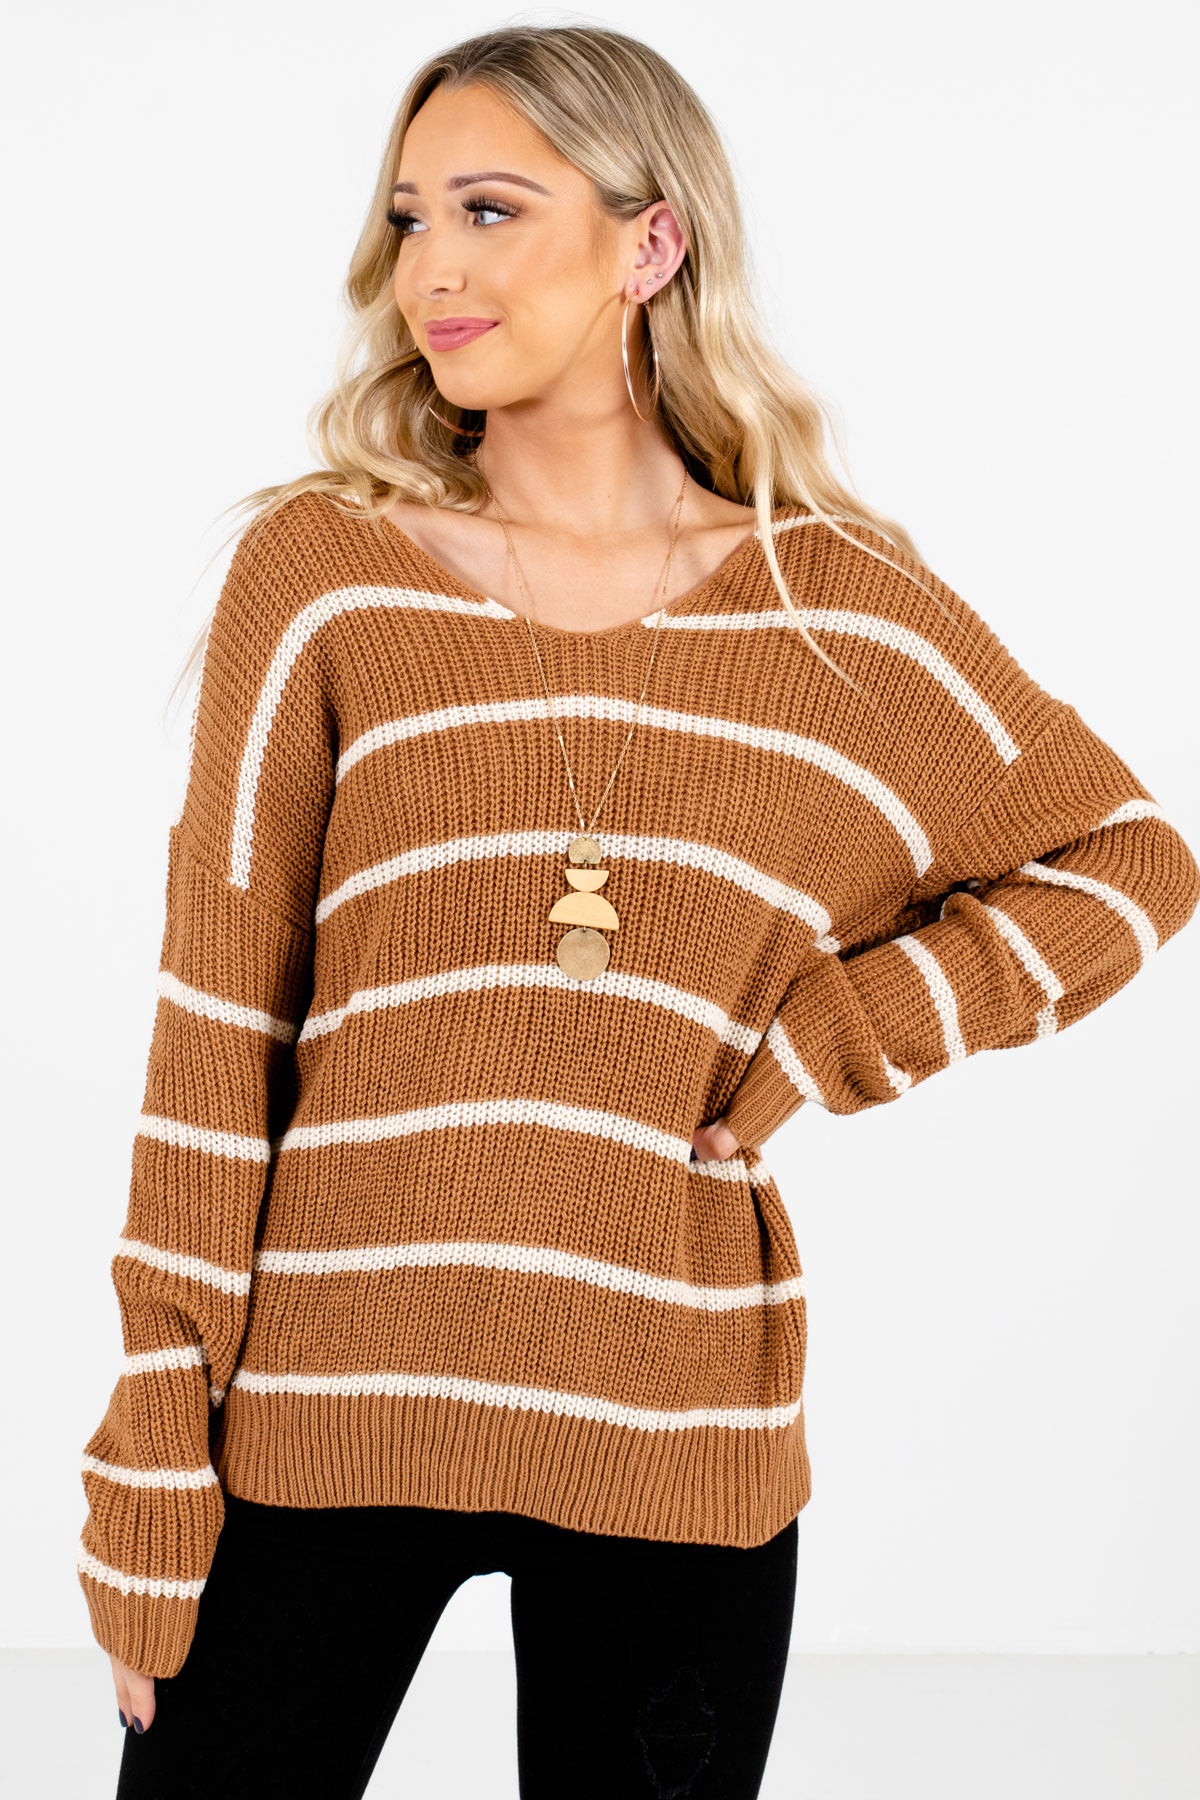 Brown and White Striped Boutique Sweaters for Women